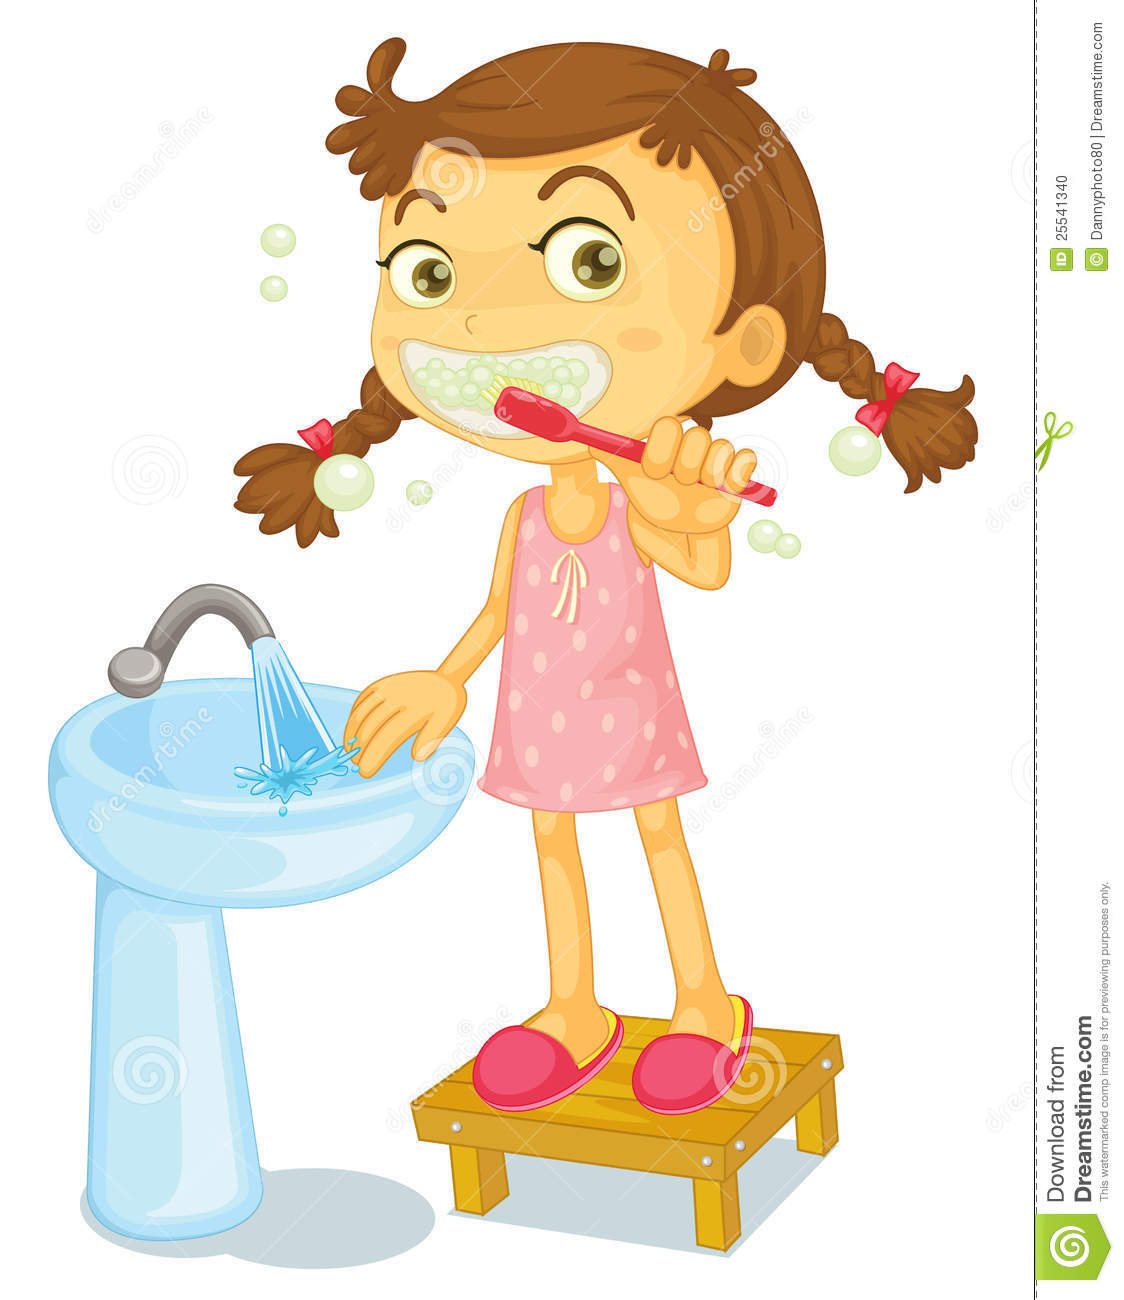 Illustration Of A Girl Brushing Teeth On A White Background